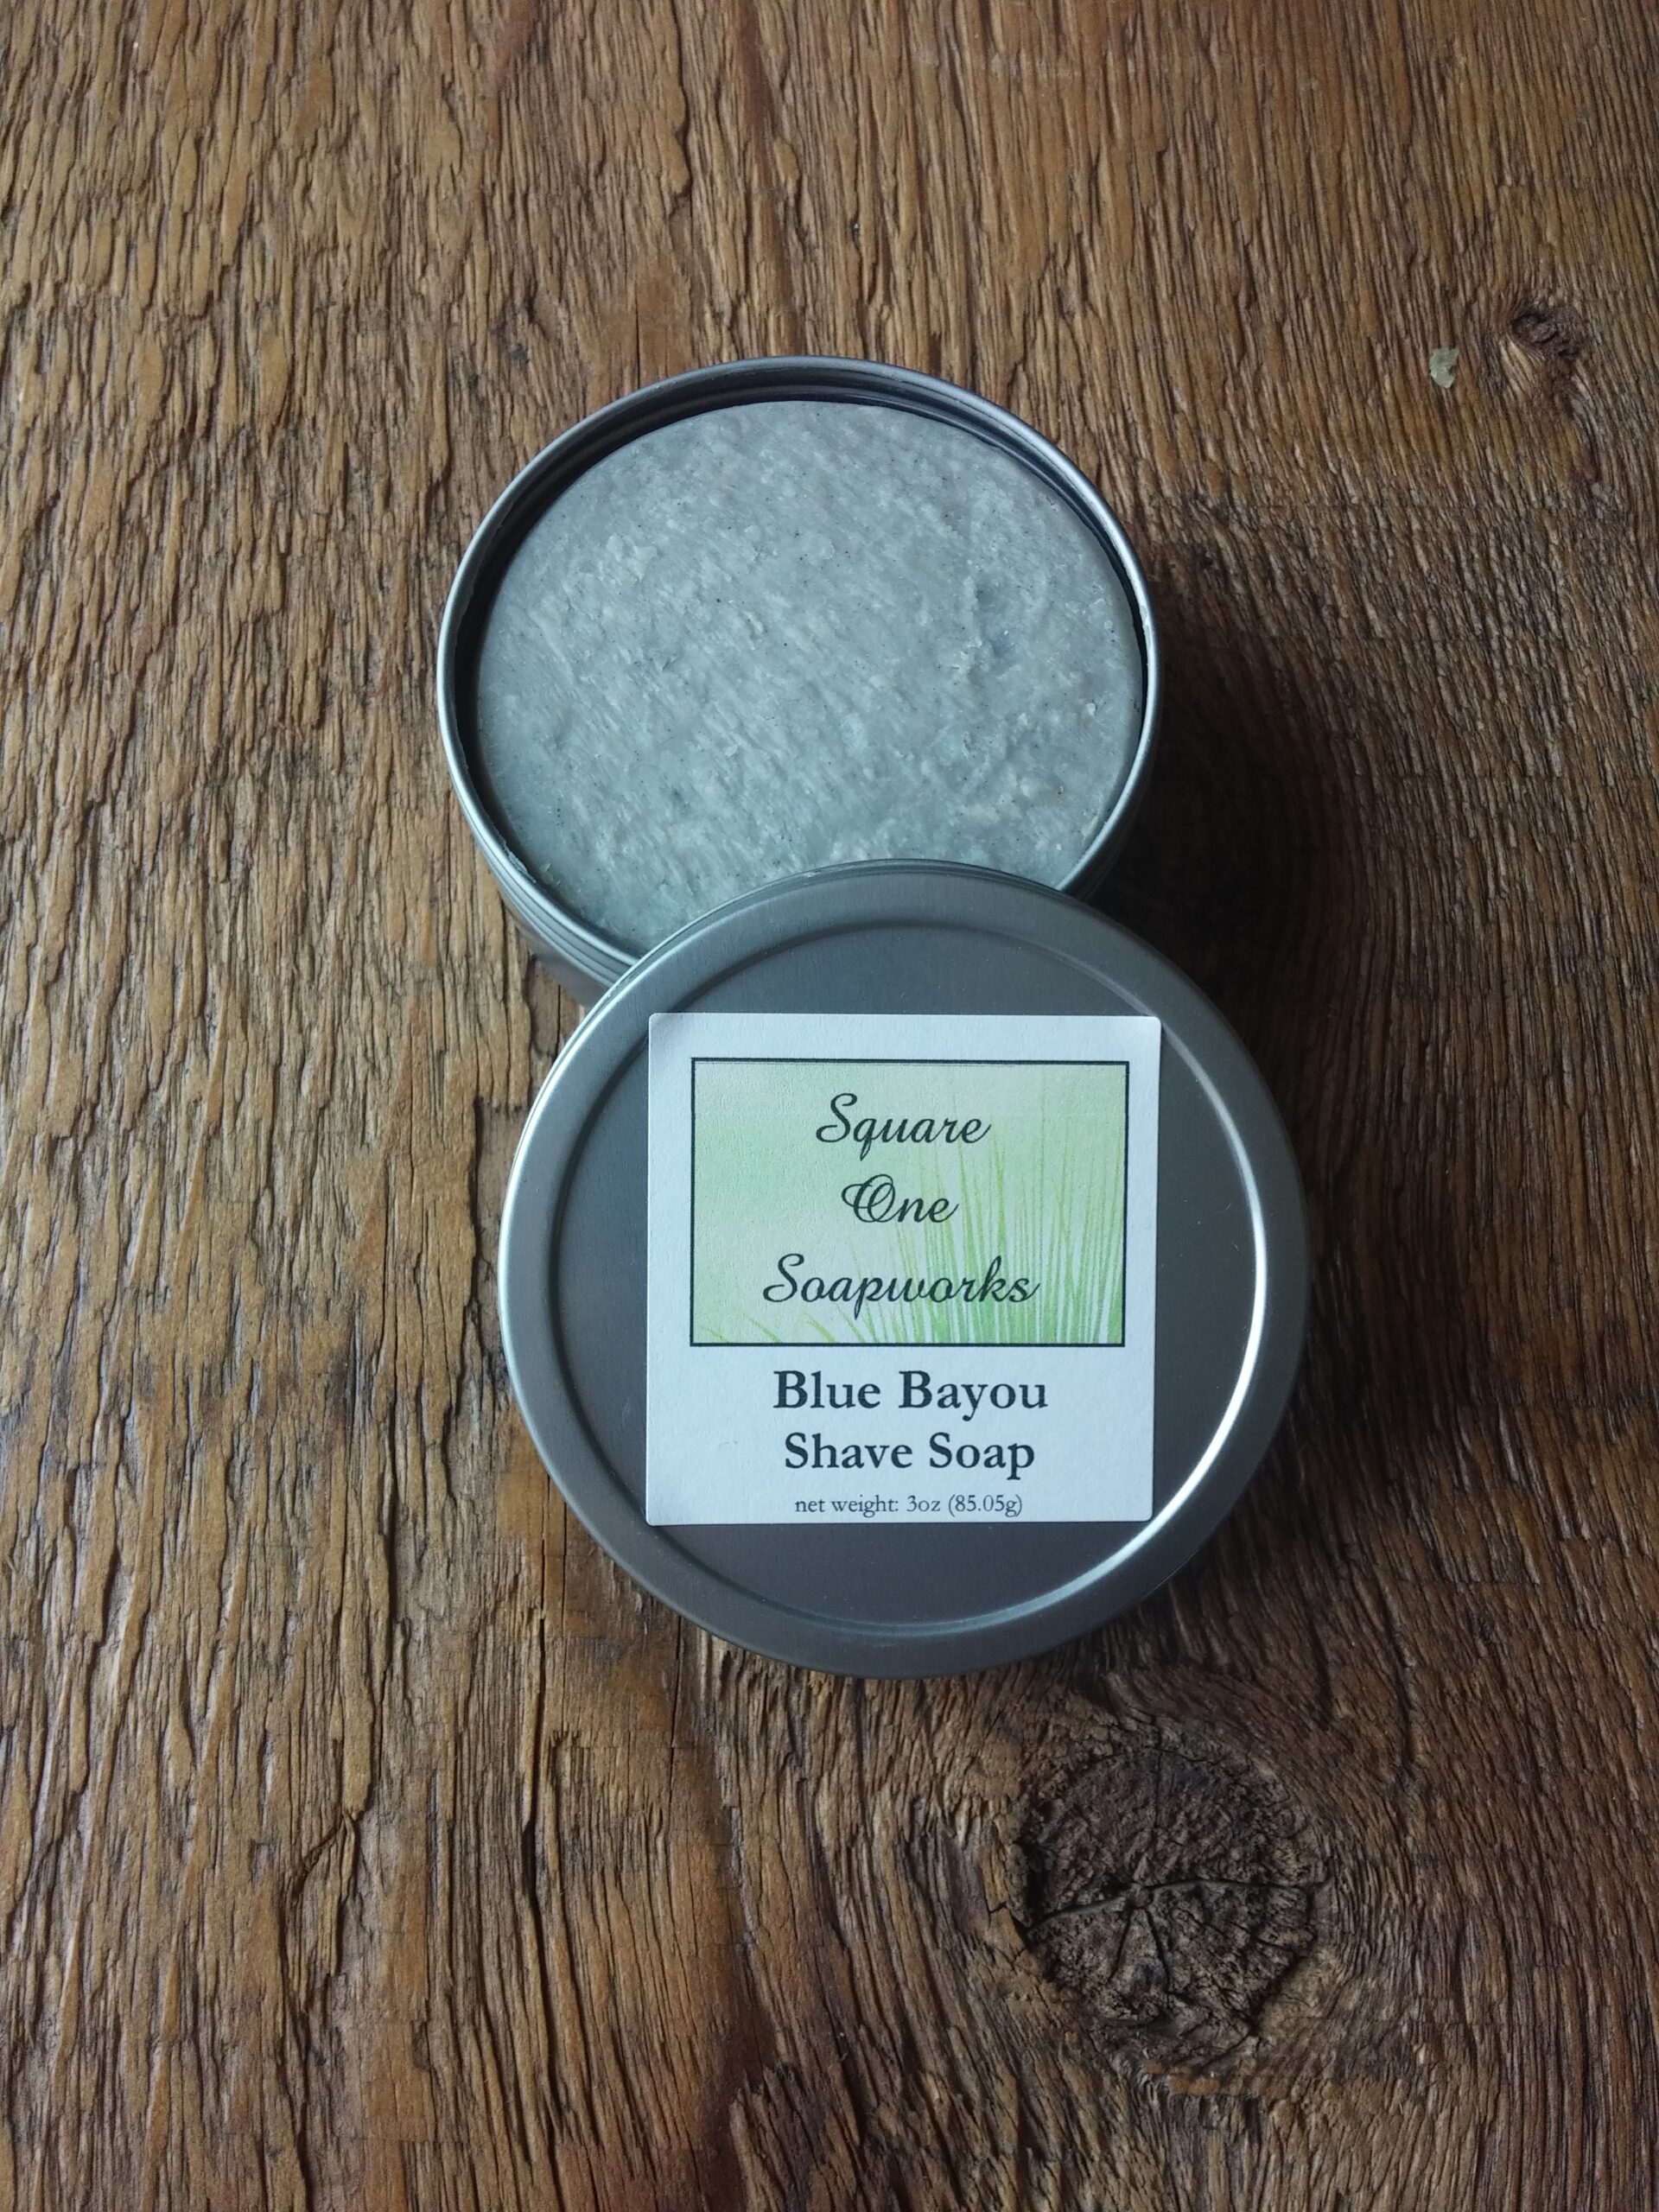 Blue Bayou Shave Soap - Square One Soapworks